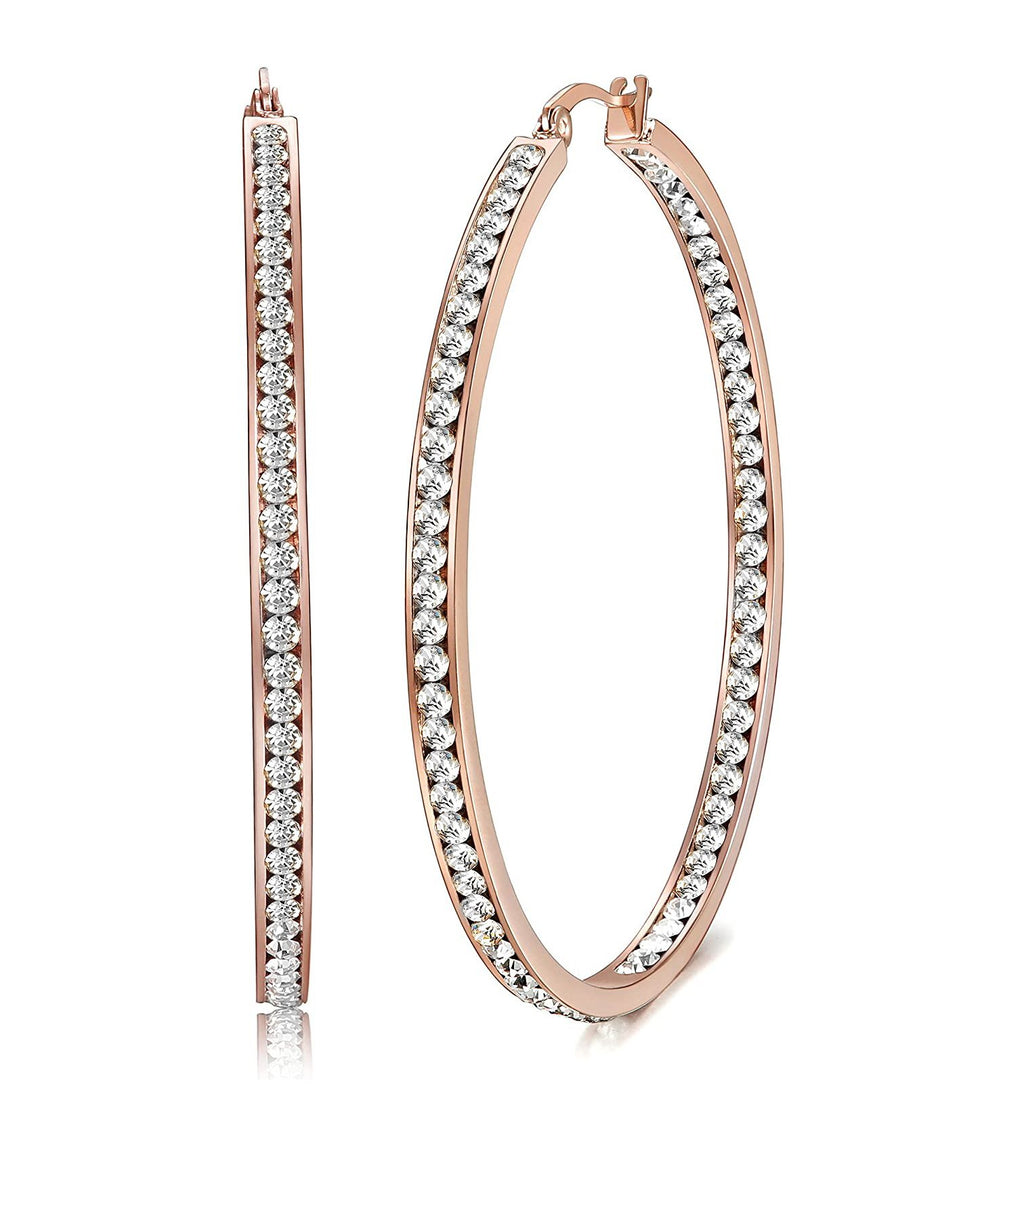 2" Pave Hoop Earring With Crystals in 18K Rose Gold Plated